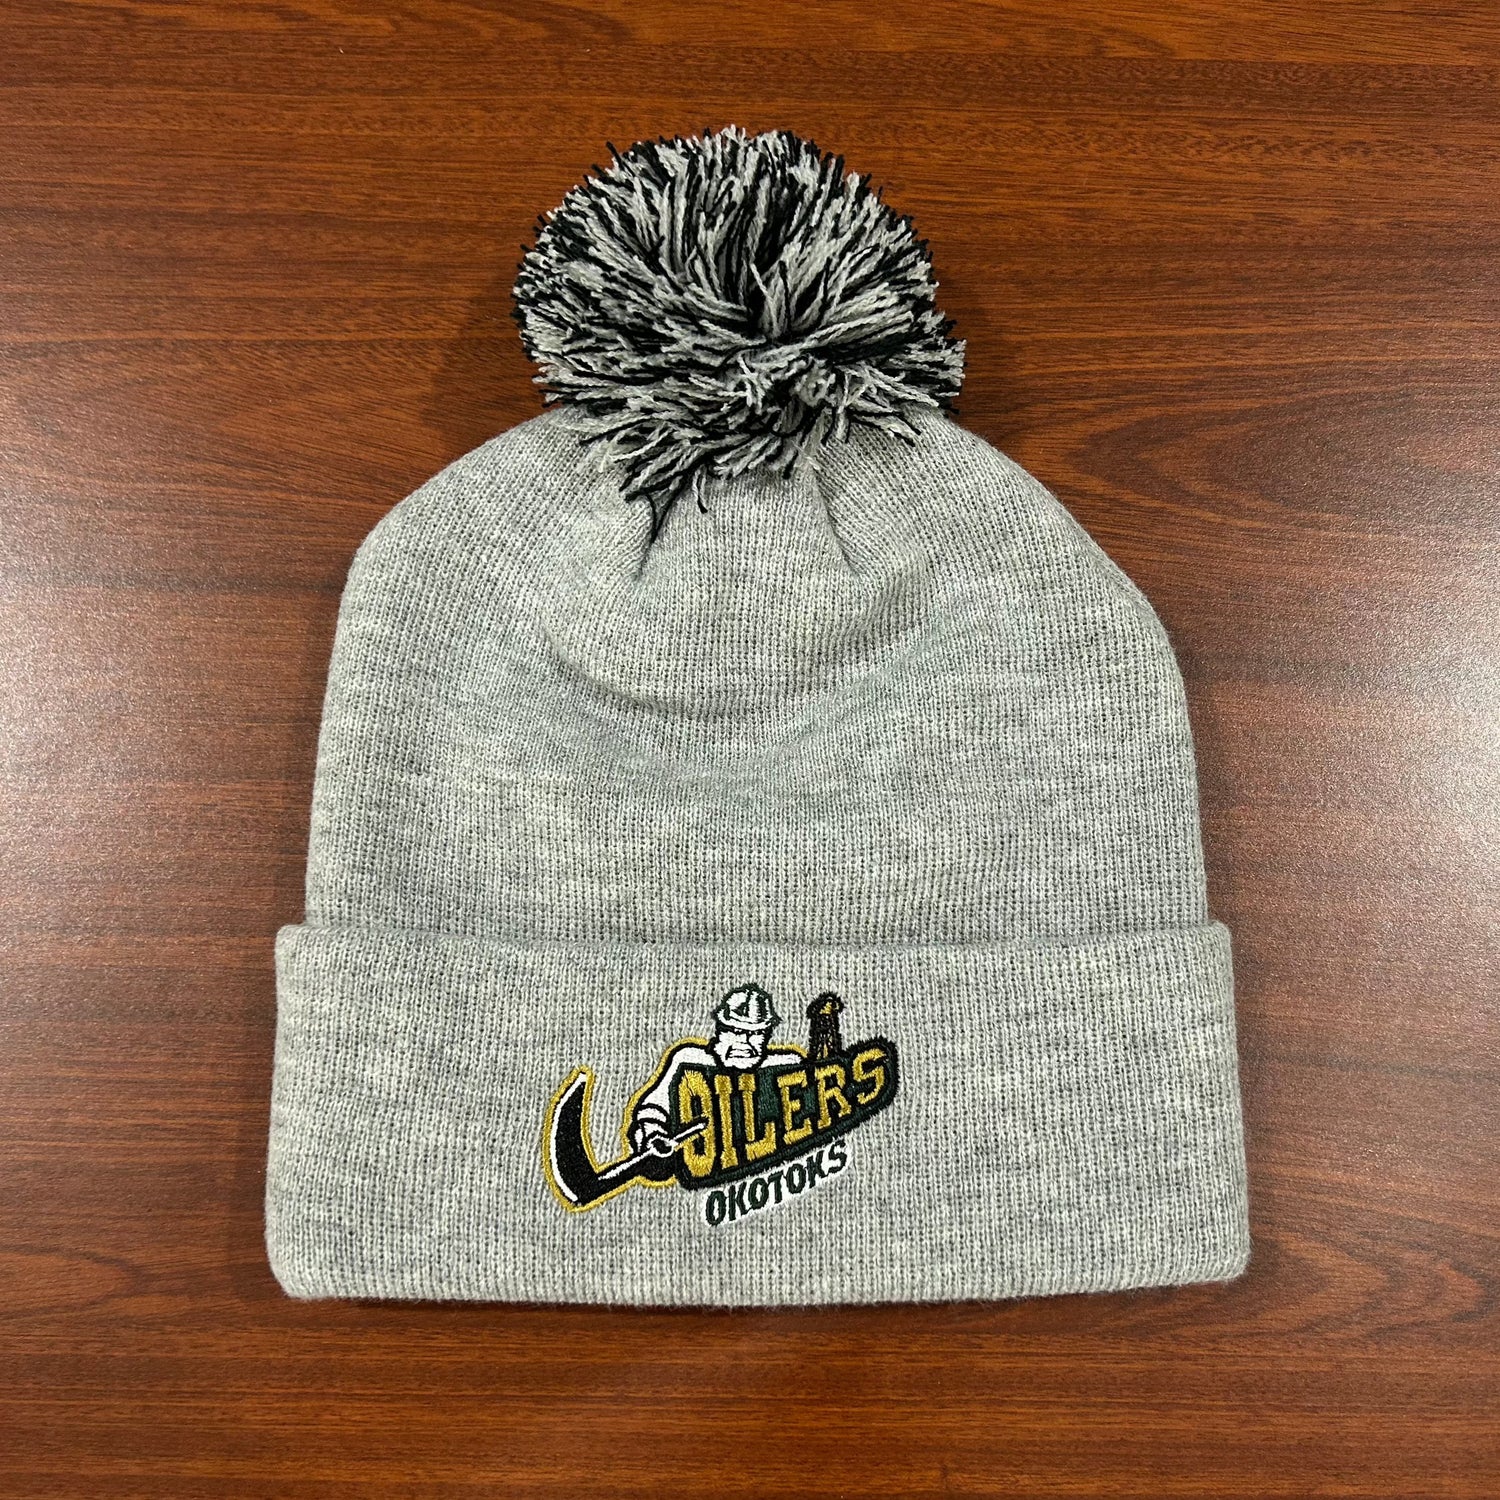 Grey toque with black and grey pom sitting on a brown table. The toque features a fully embroidered Okotoks Oilers primary logo on the cuff.